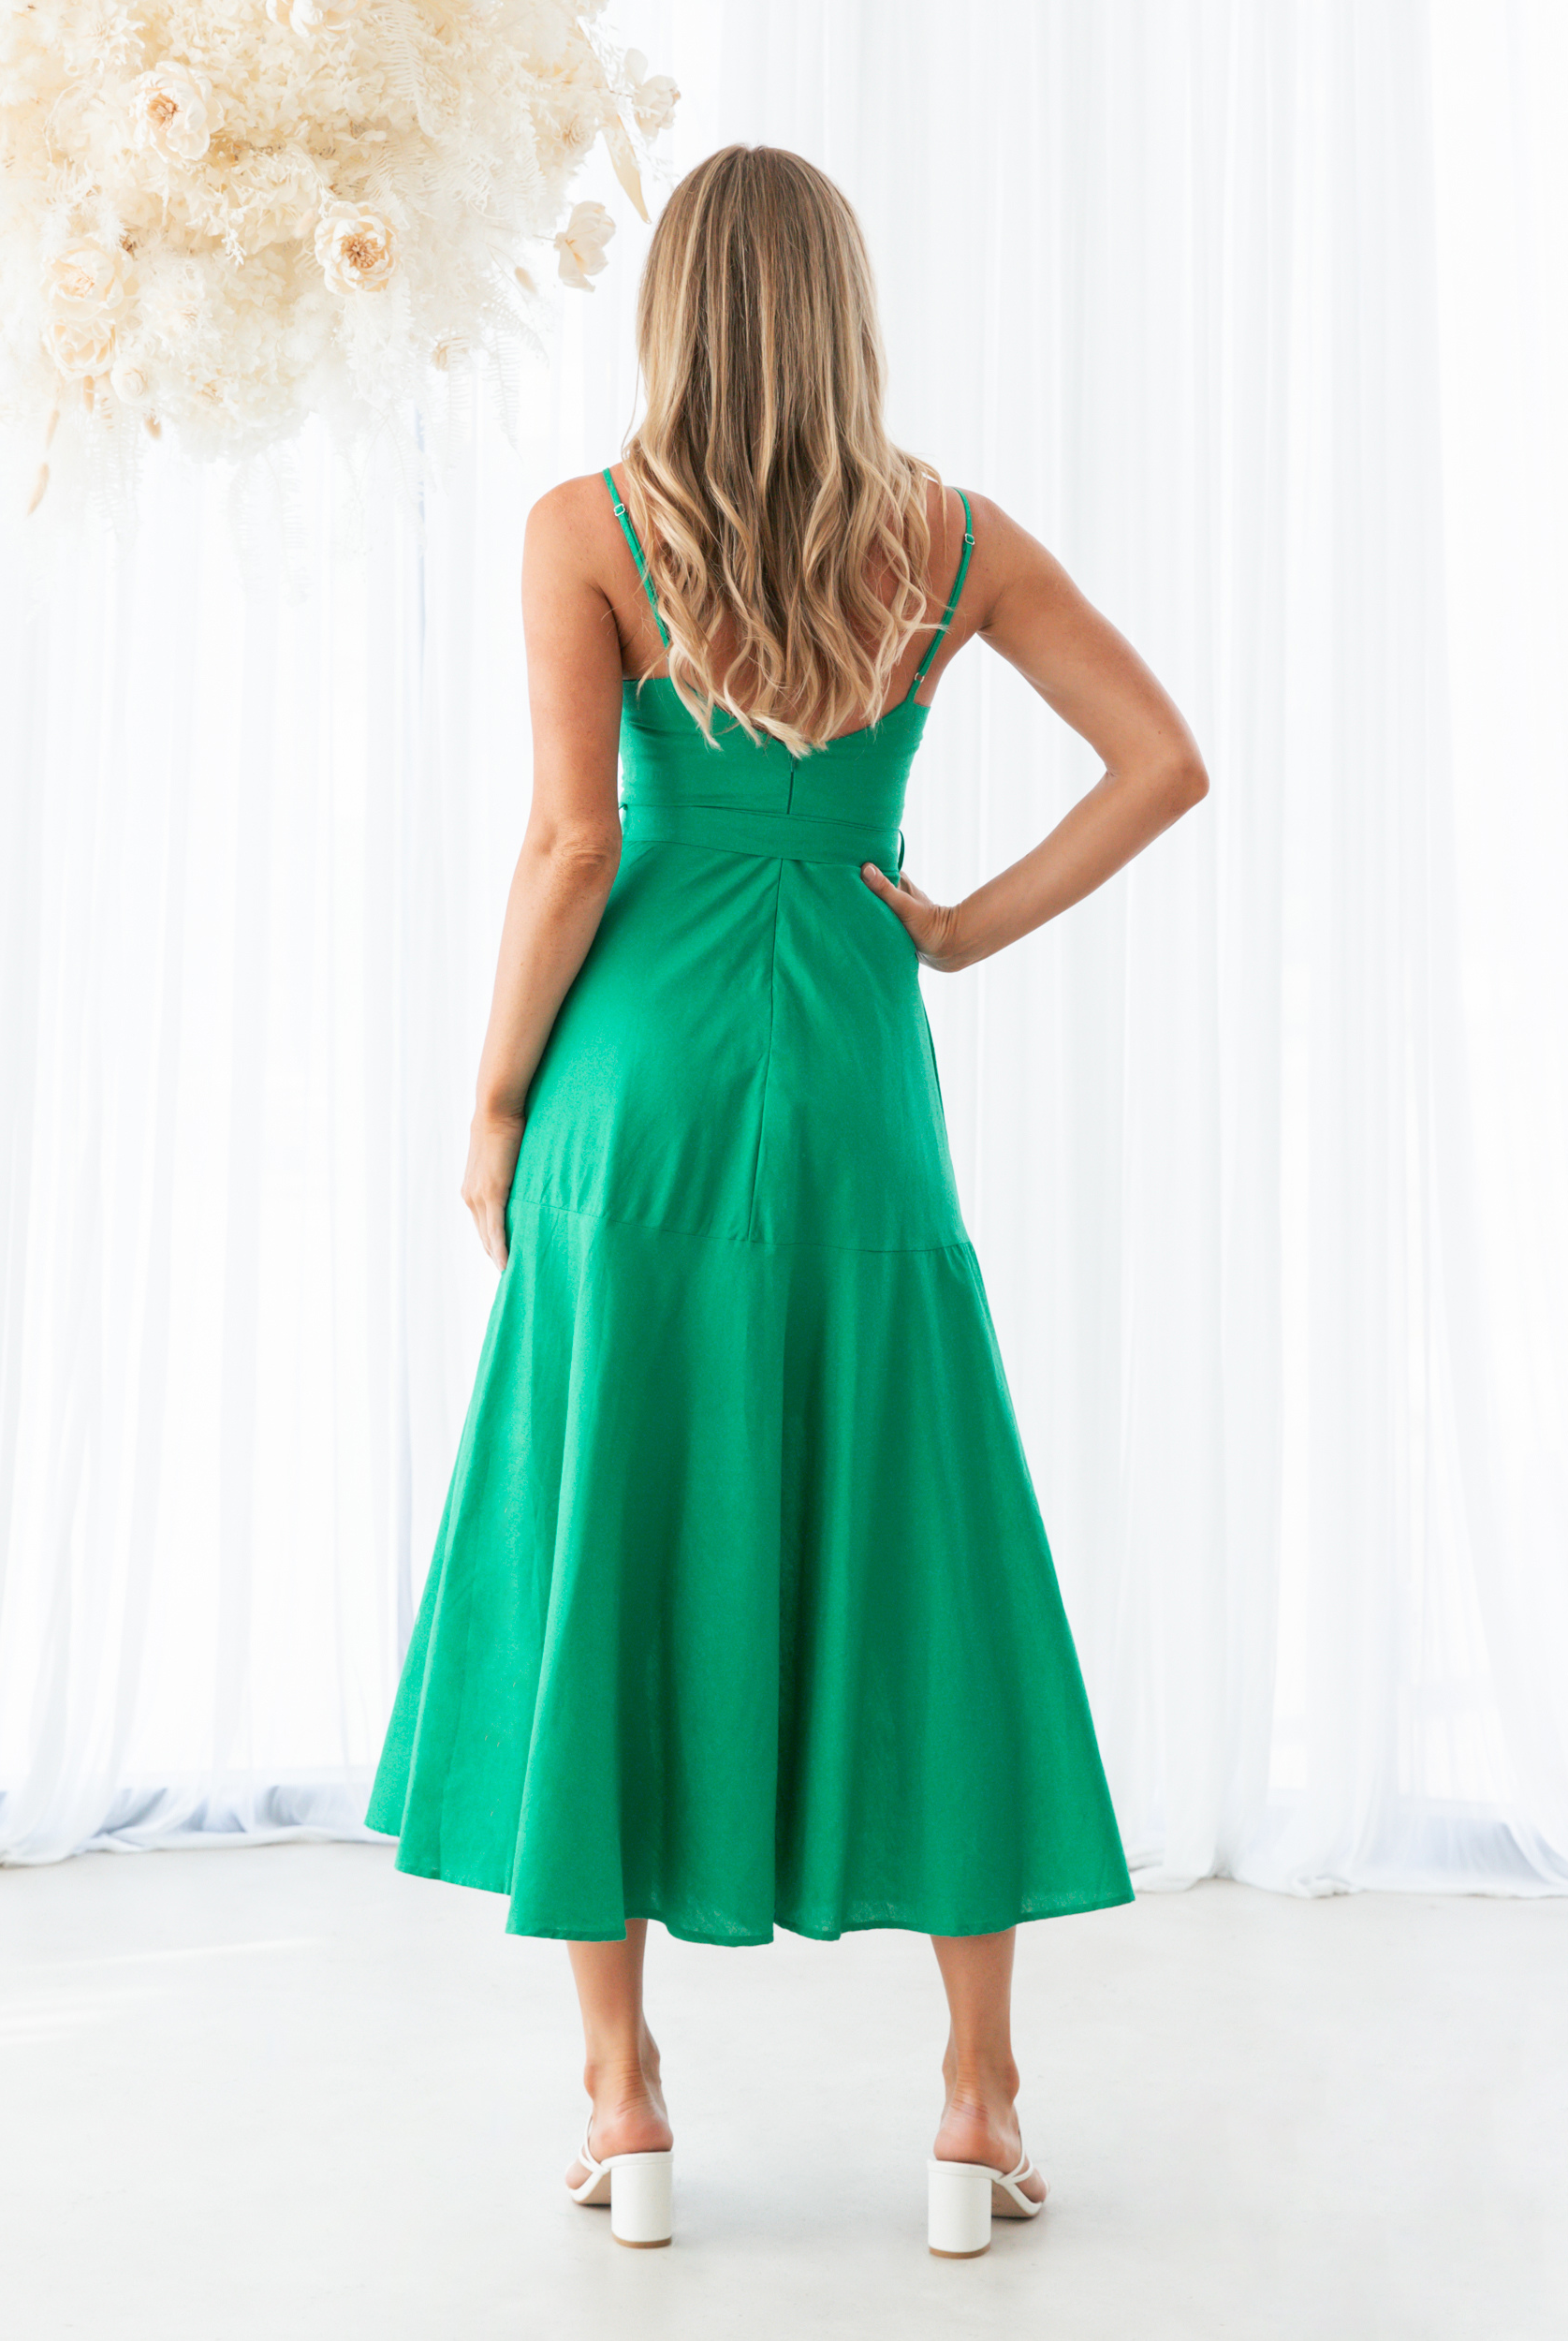 Festive green christmas dress with straps and bow detail at waist